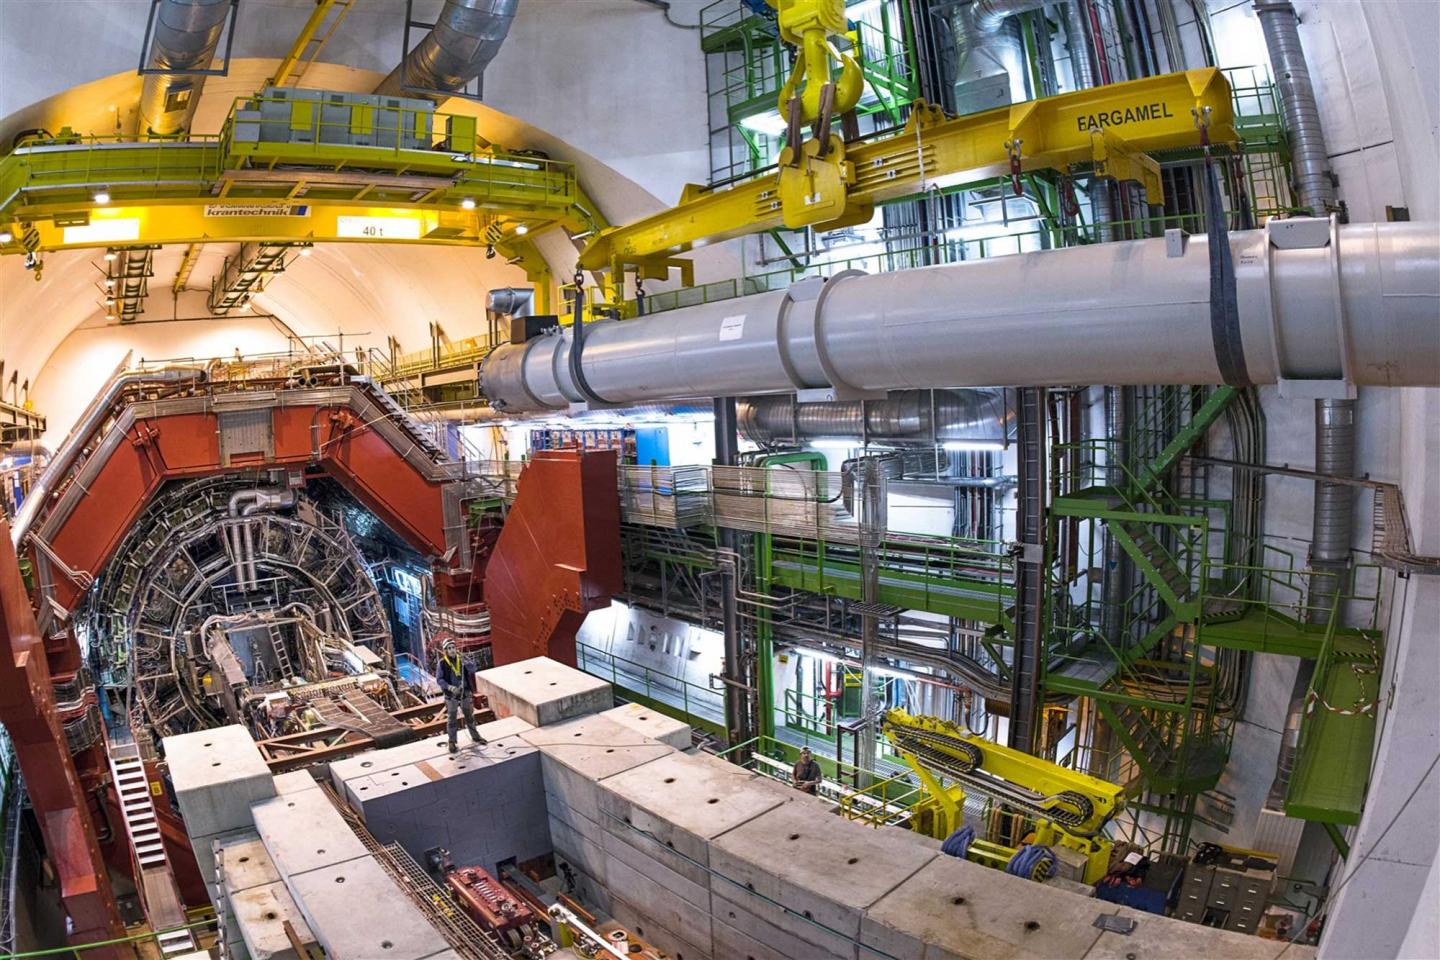 Major work to ready the LHC experiments for Run 2